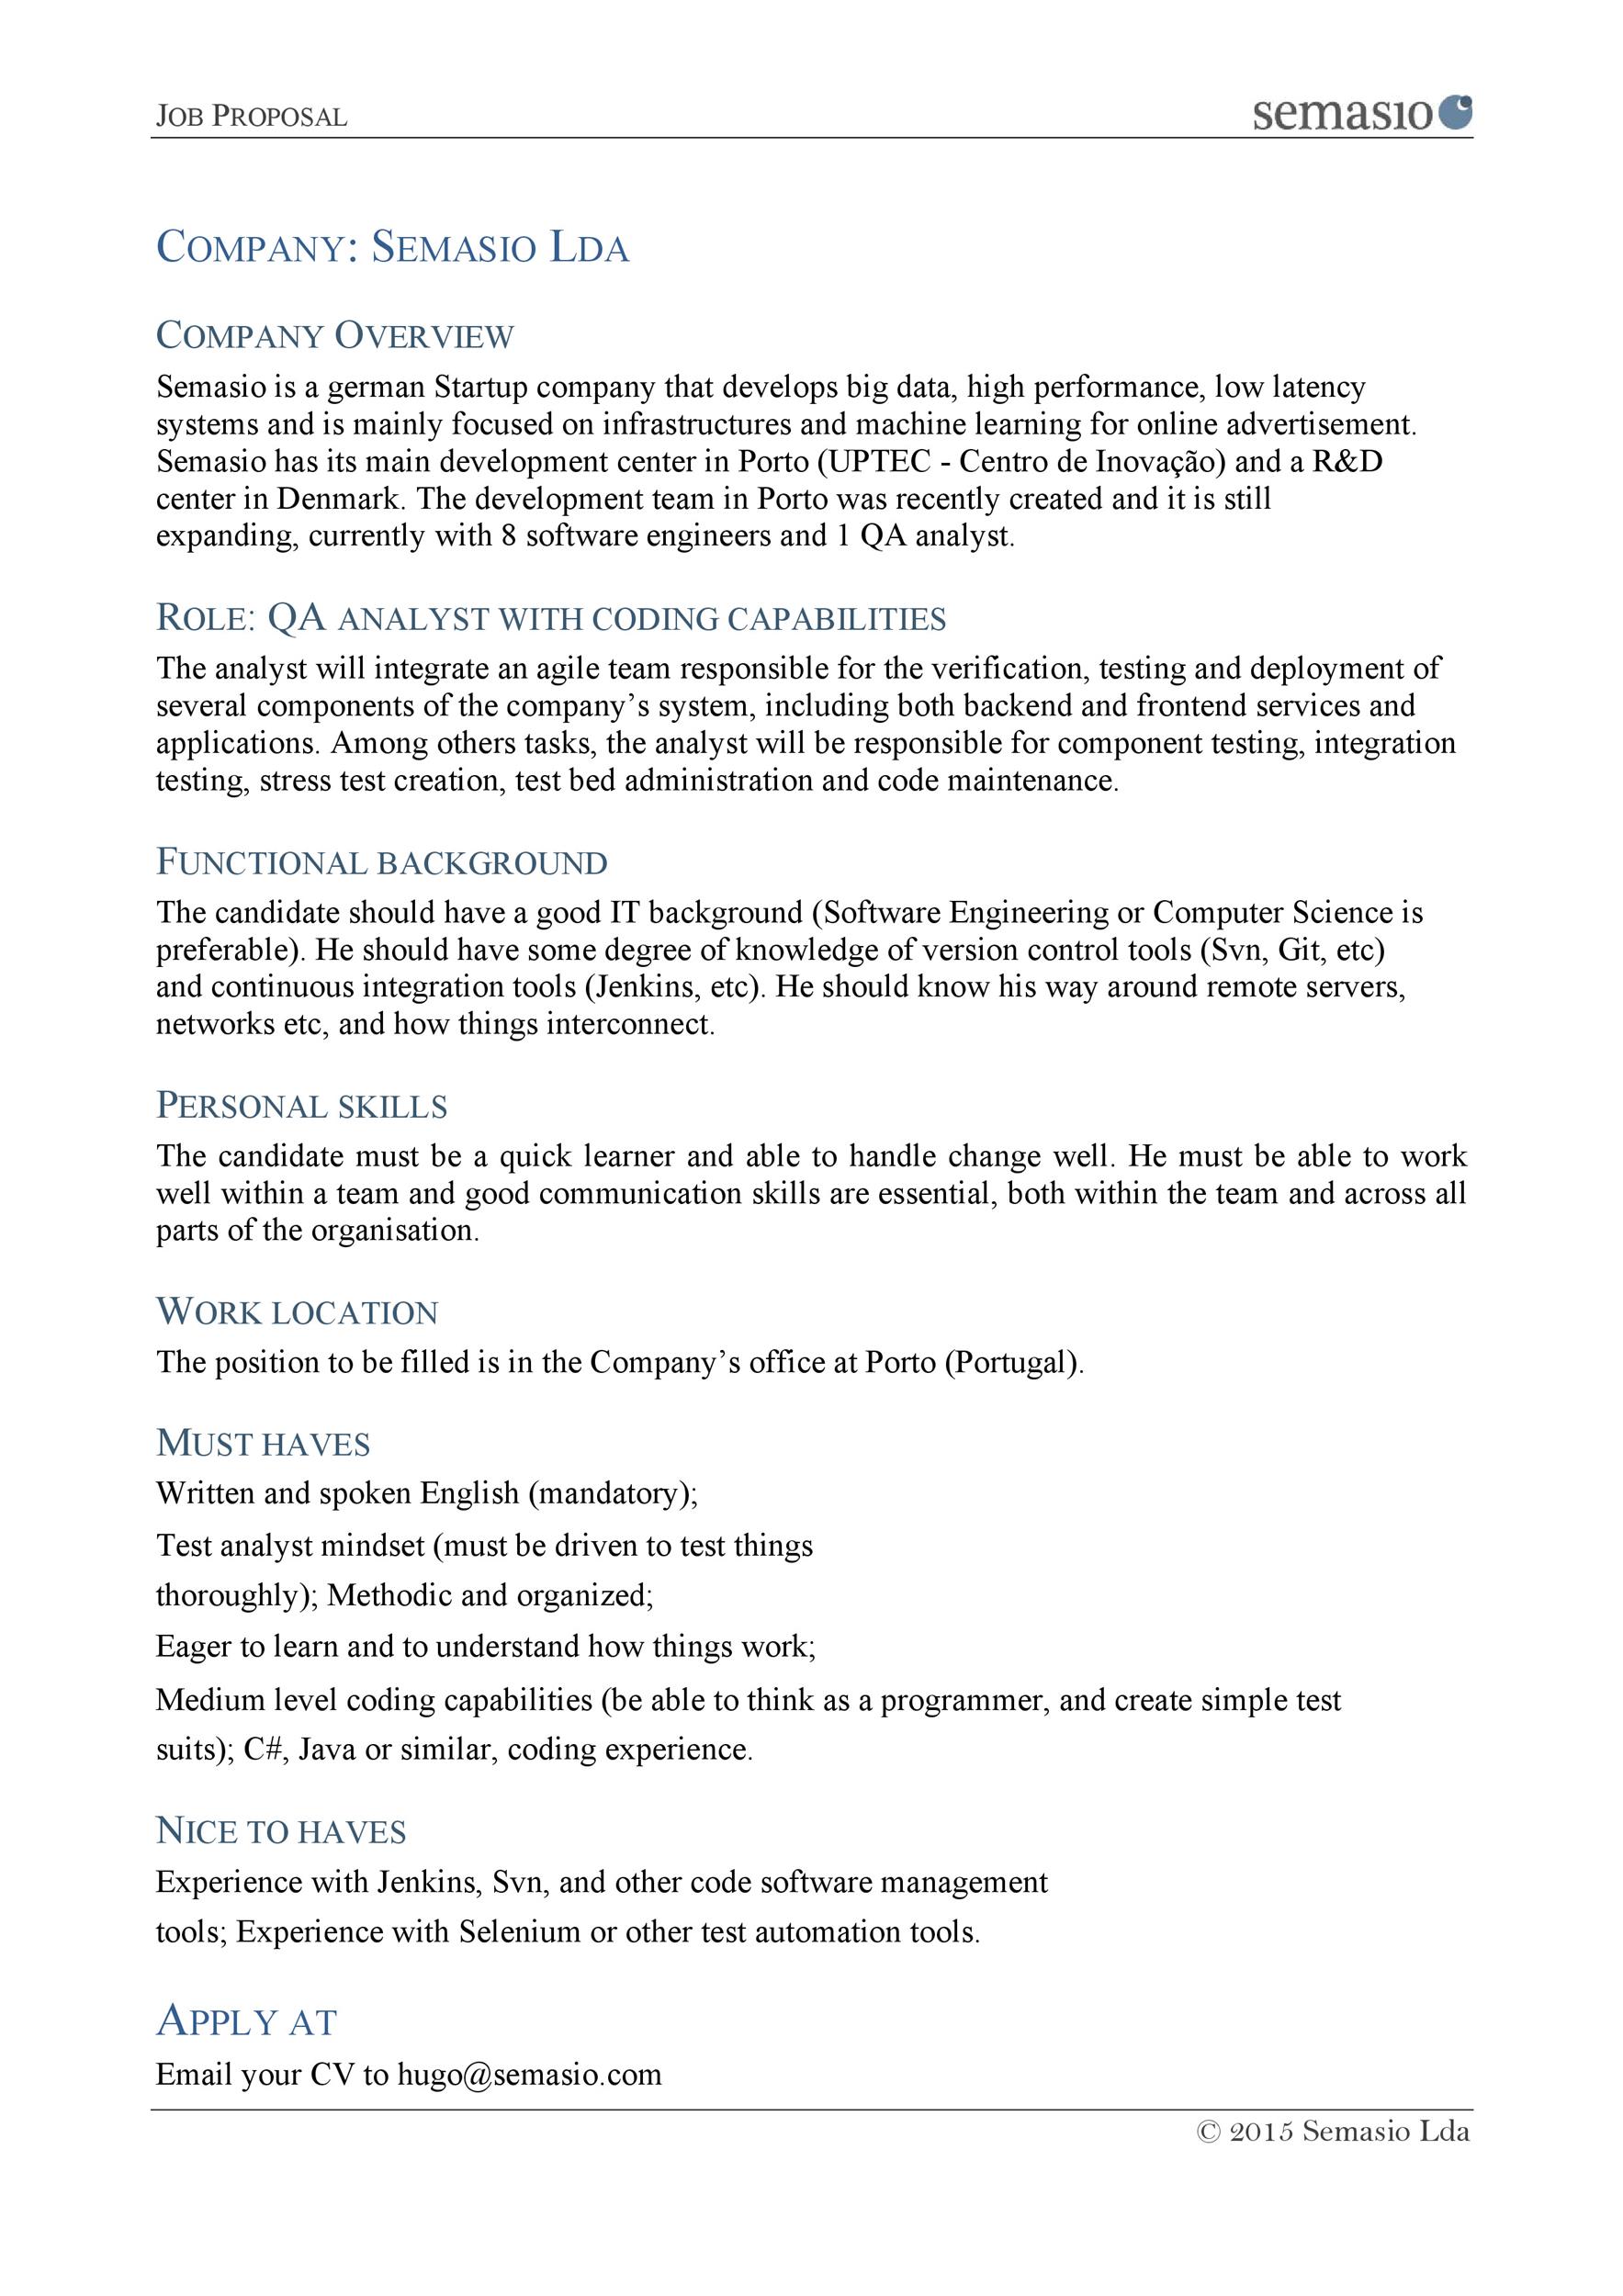 New Job Proposal Template - Free Resume Templates Throughout Employment Proposal Template